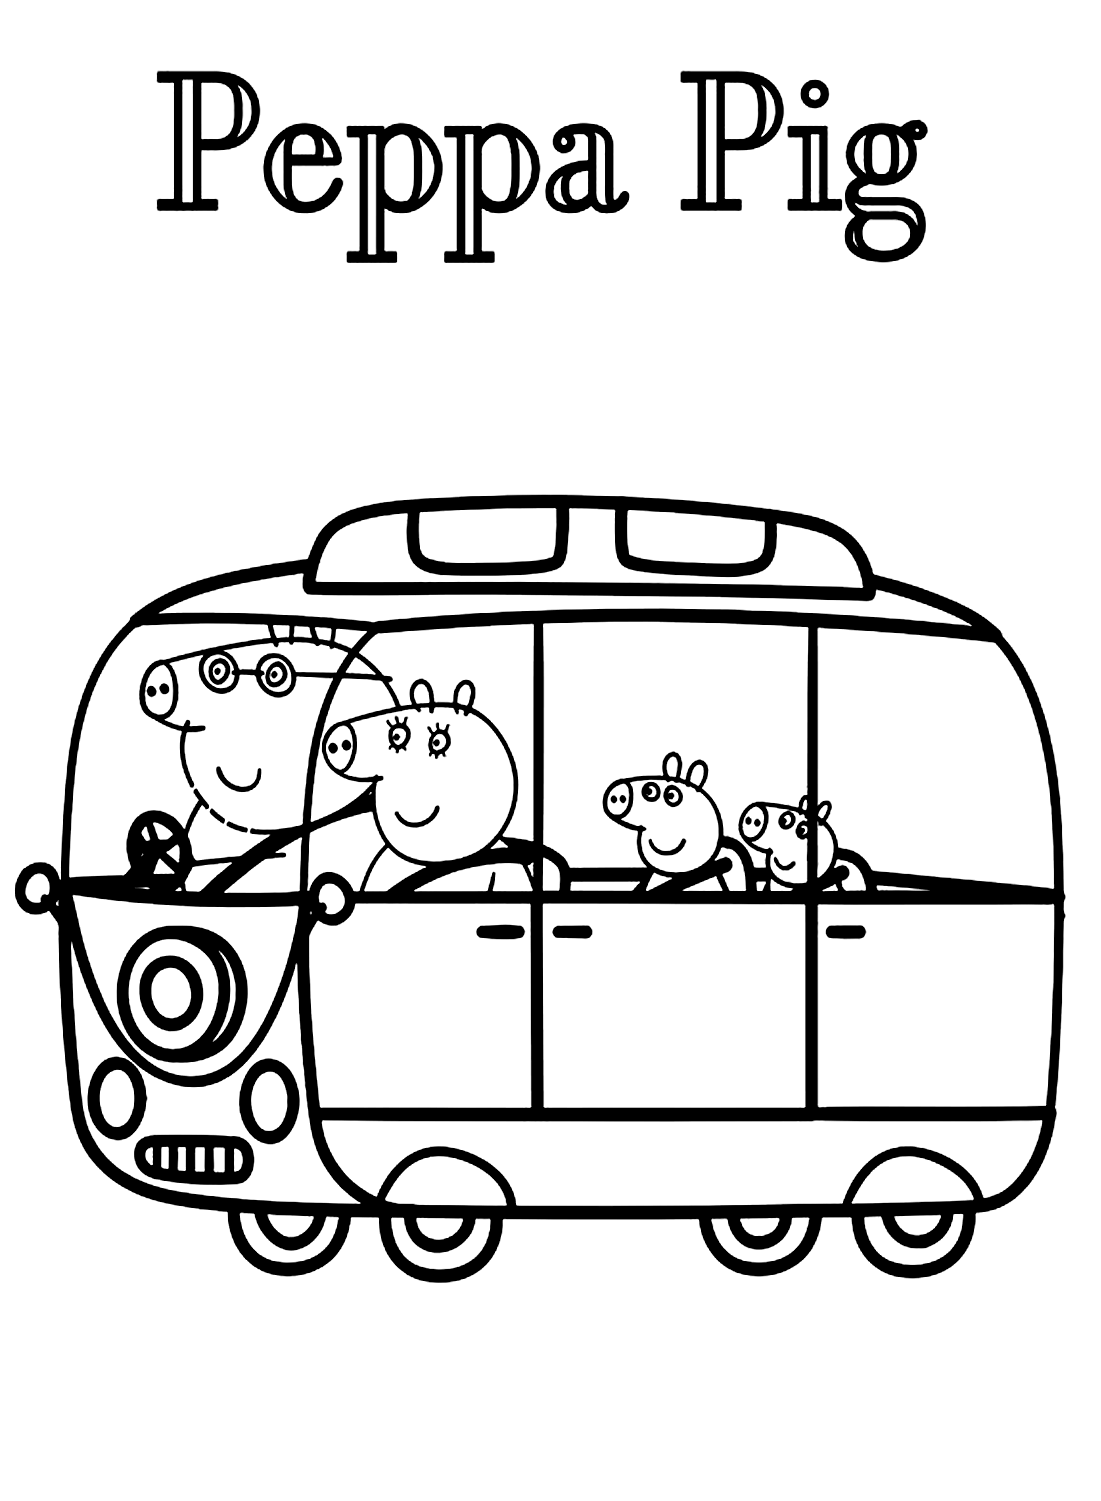 Coloring Page Peppa Pig in Car